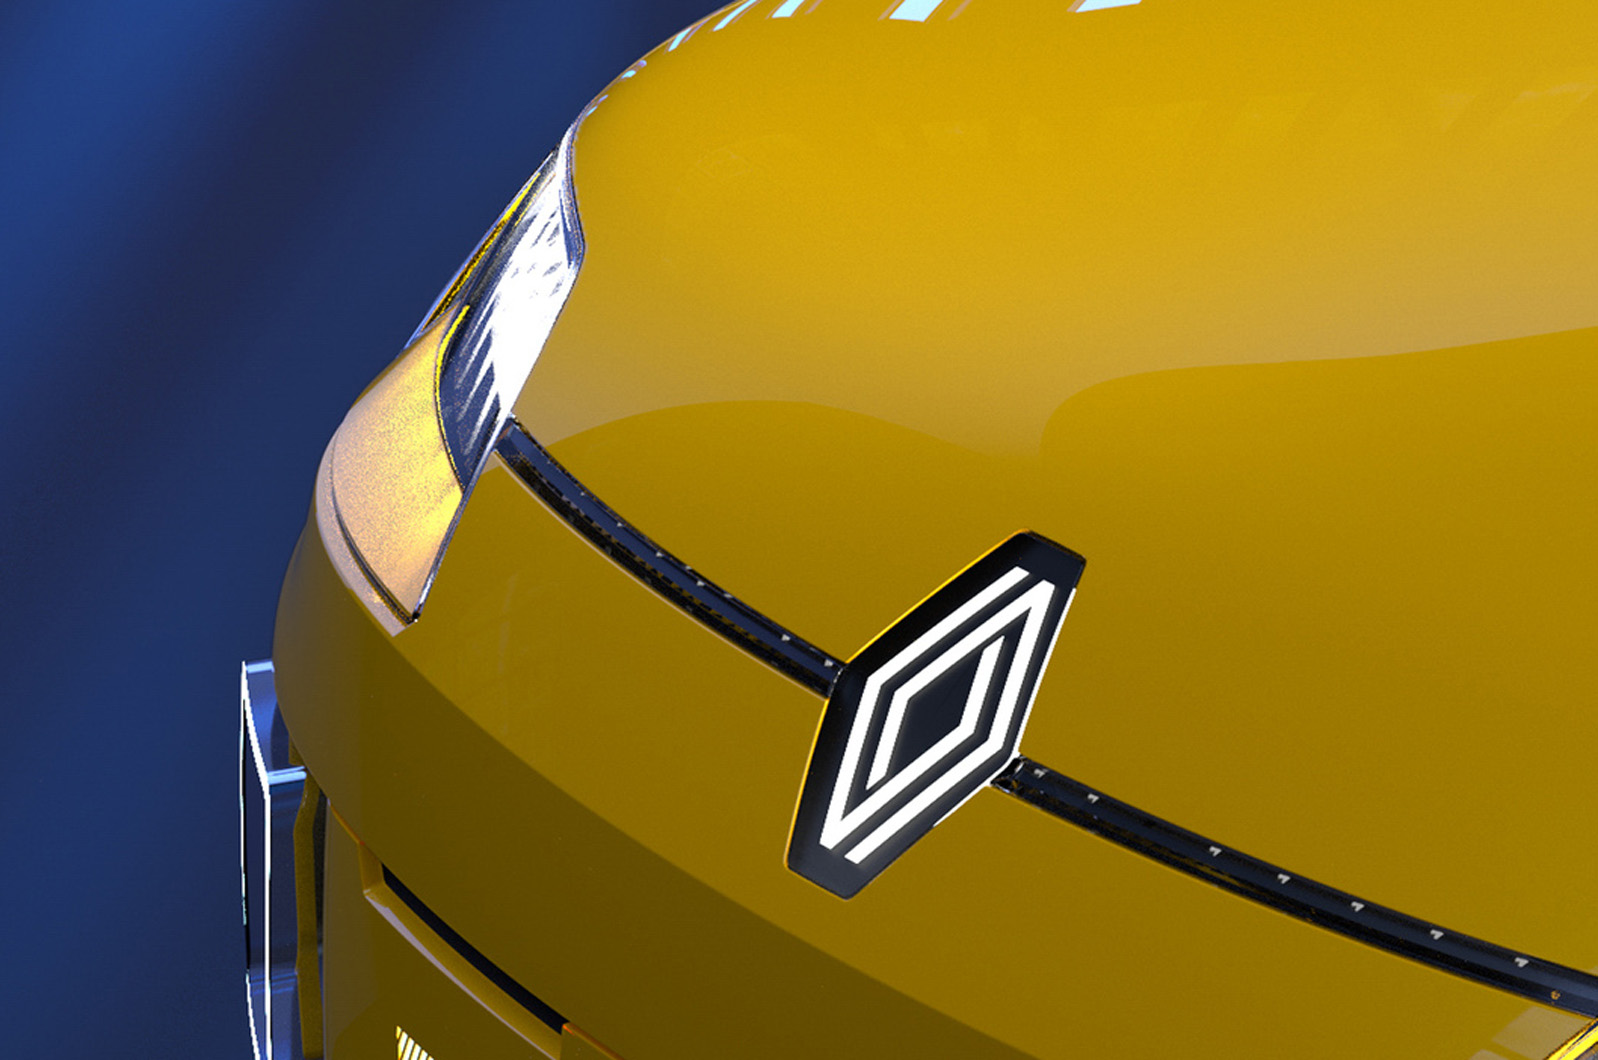 All Renault models to feature retro new logo by 2024